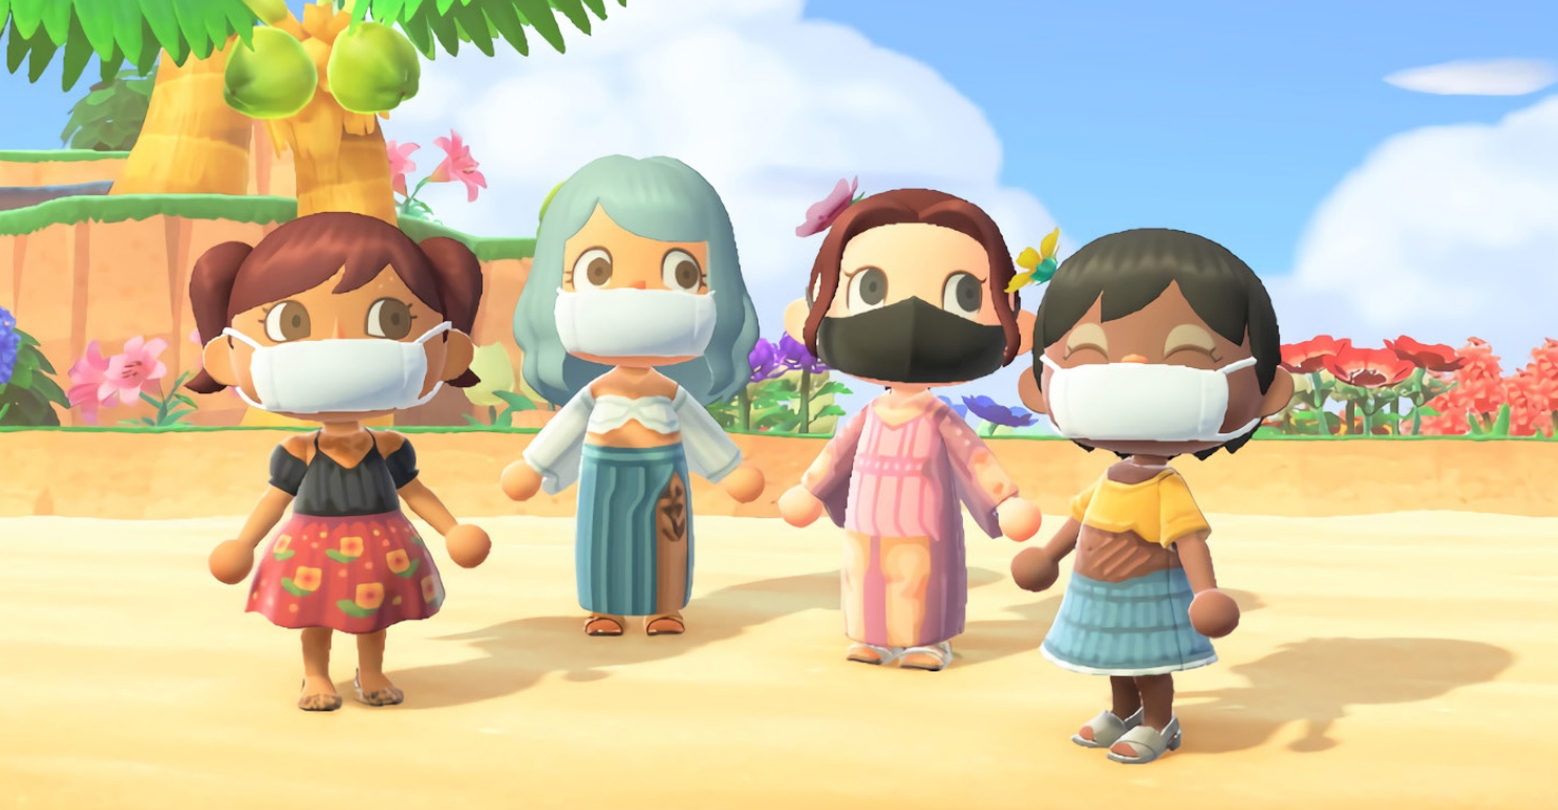 Animal Crossing: New Horizons And Gillette Team Up For “Skinclusive Summer Line”